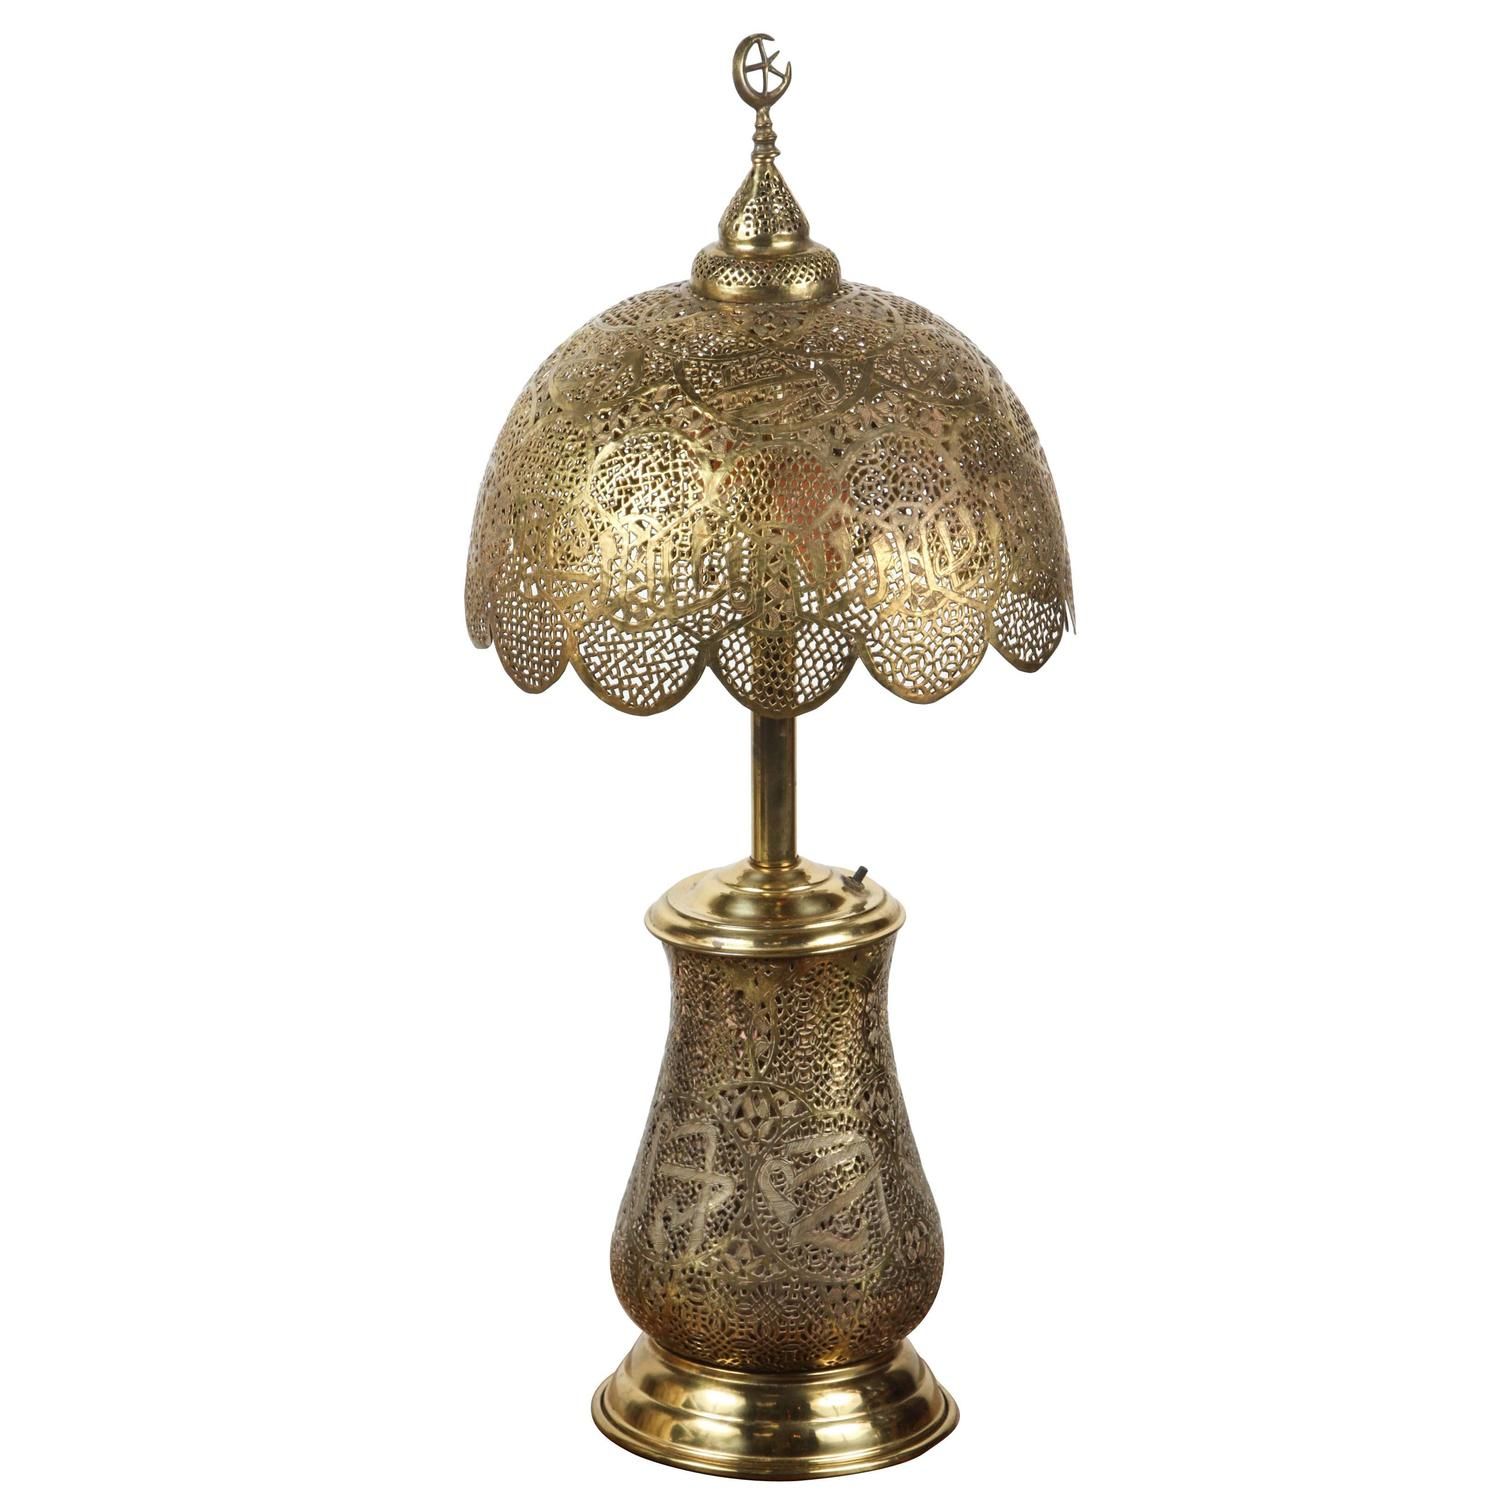 Moorish Revival Brass Syrian Table Lamp | From a unique collection ...